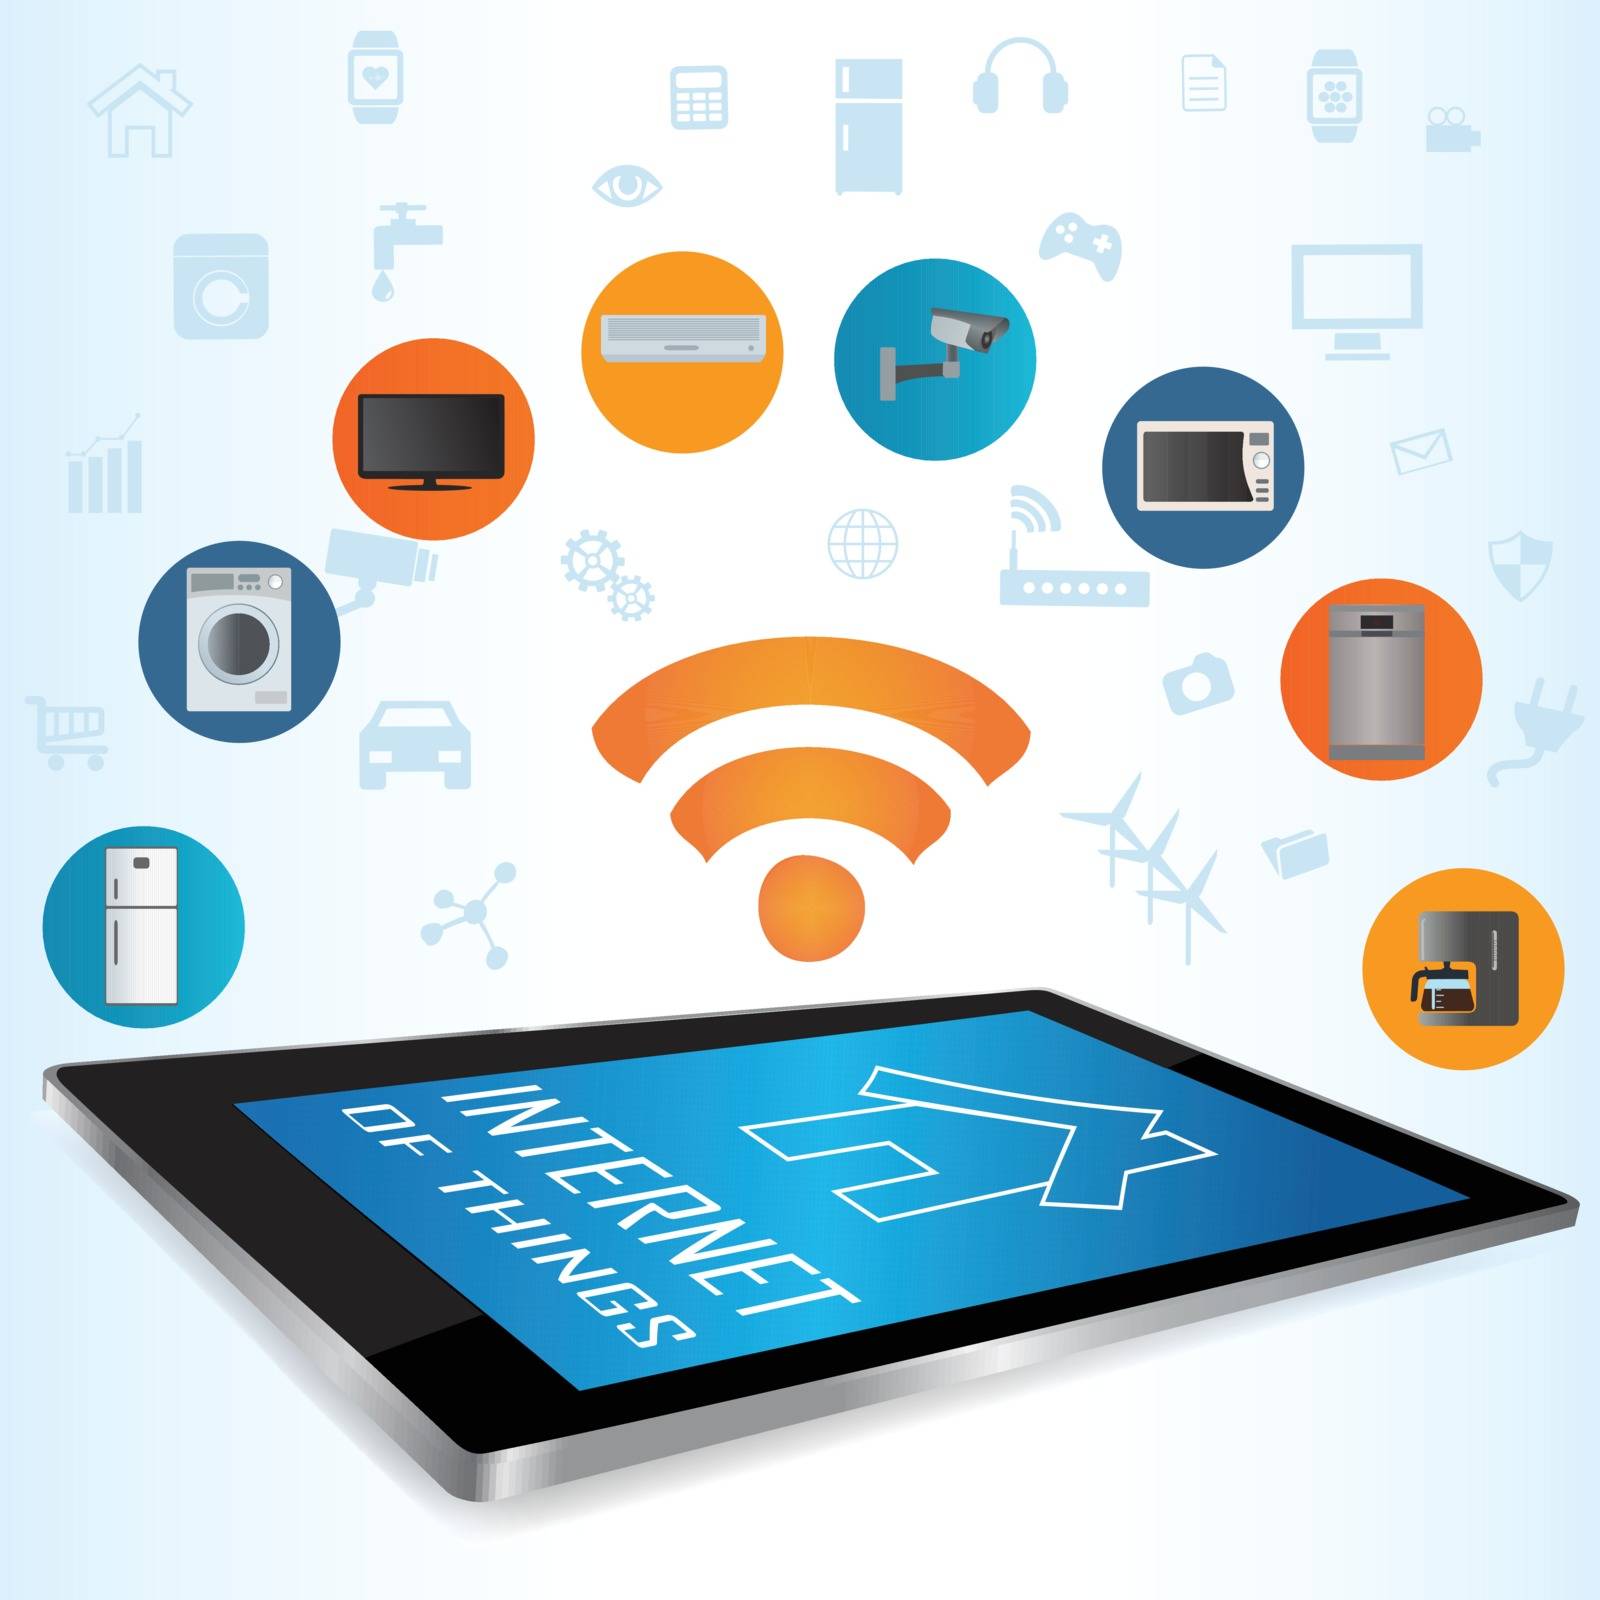 Internet of Things concept (IoT) and Tablet PC apps by monicaodo